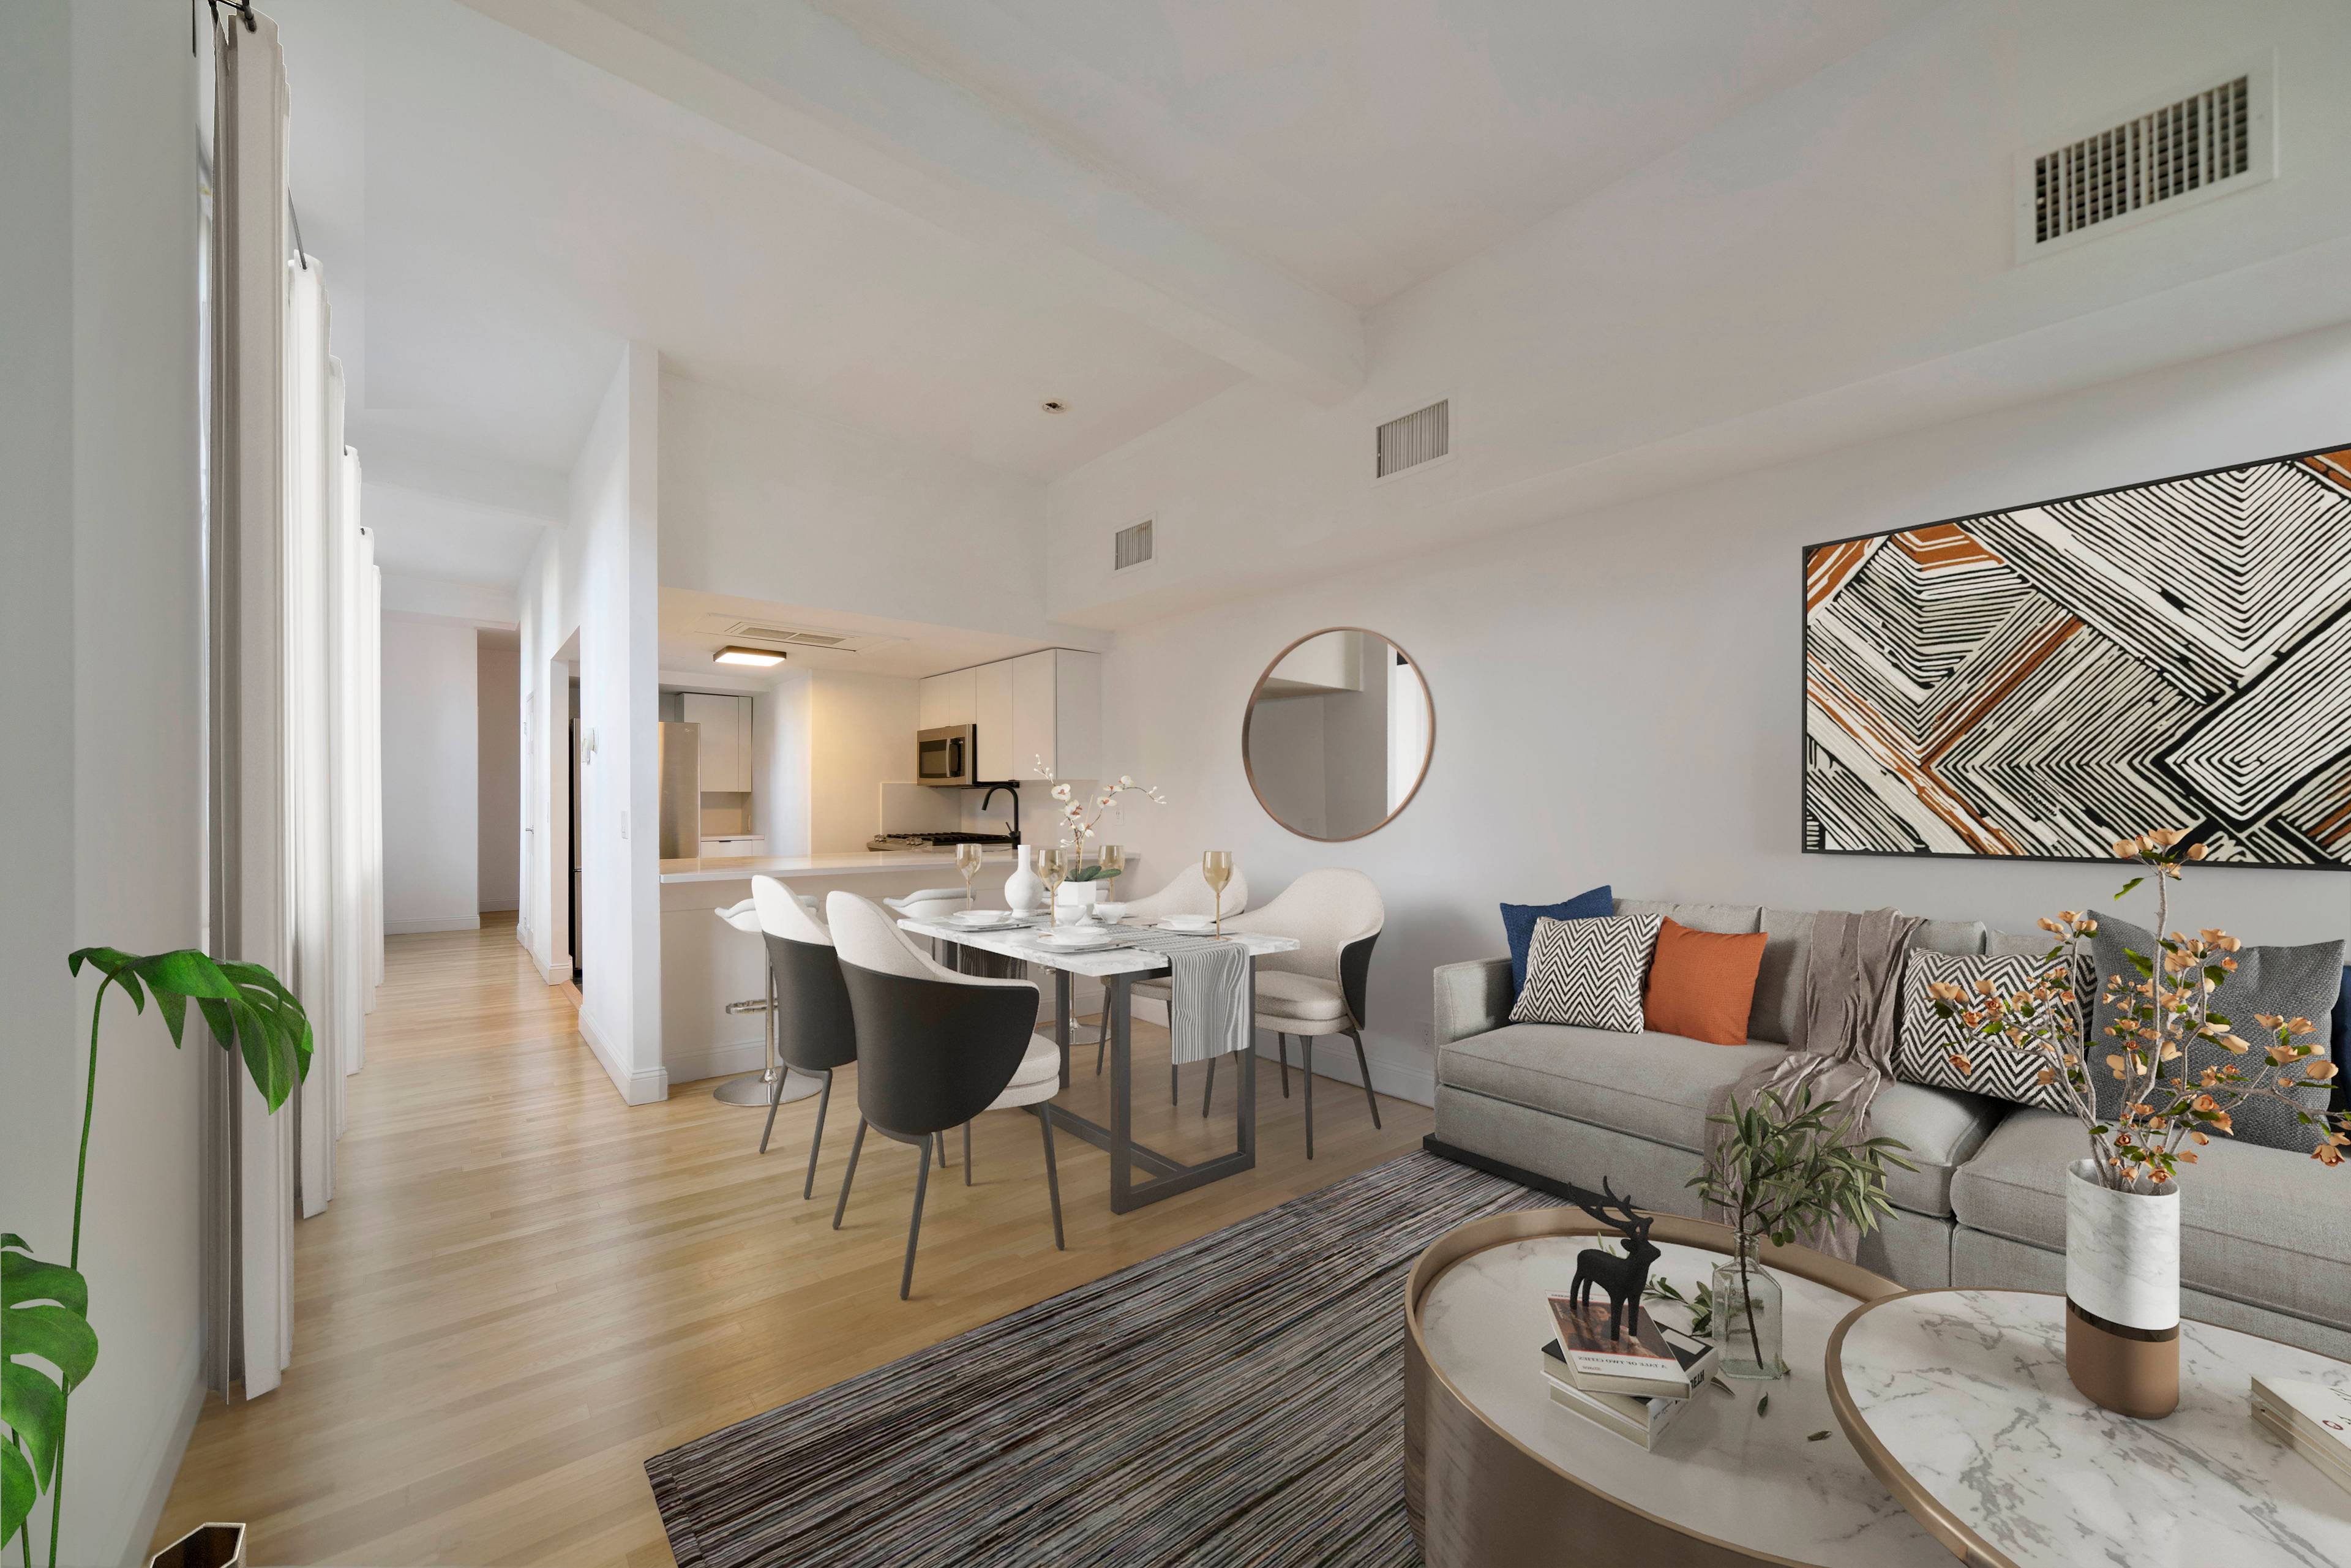 Beautiful Open and Spacious Brand New Renovation 2 Bedroom 1.5 Bathroom Soho Loft Duplex located at the Grand Adams in Downtown Hoboken!